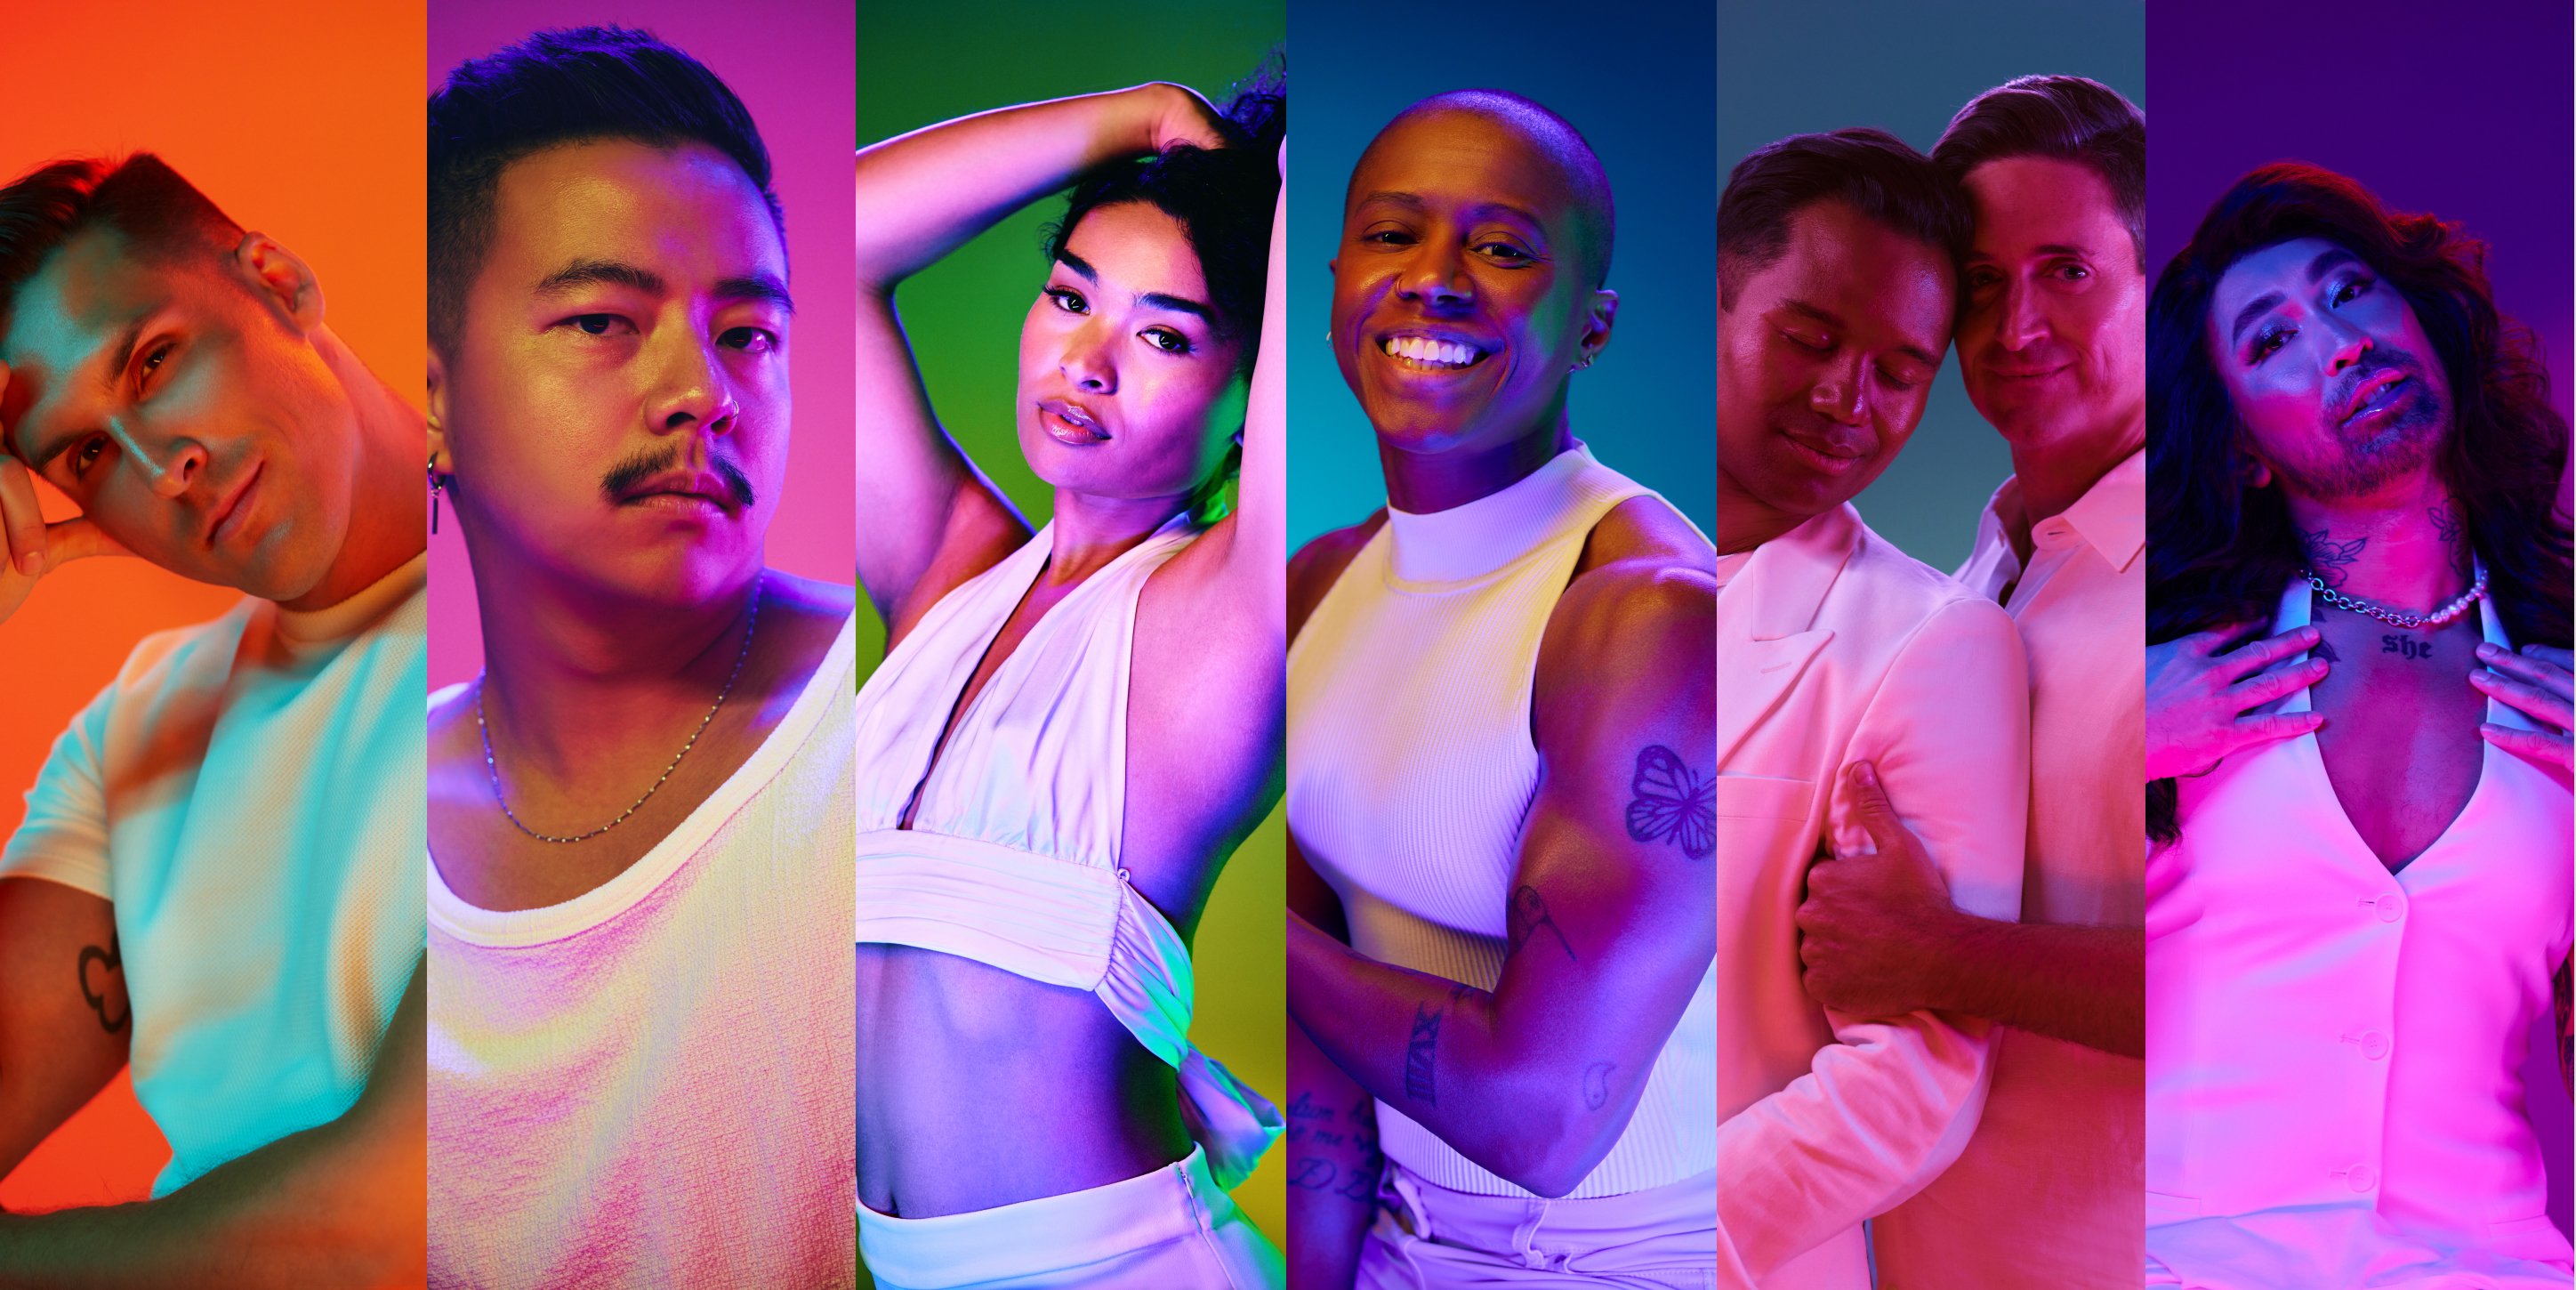 What is wellness? A conversation with the LGBTQ+ Community